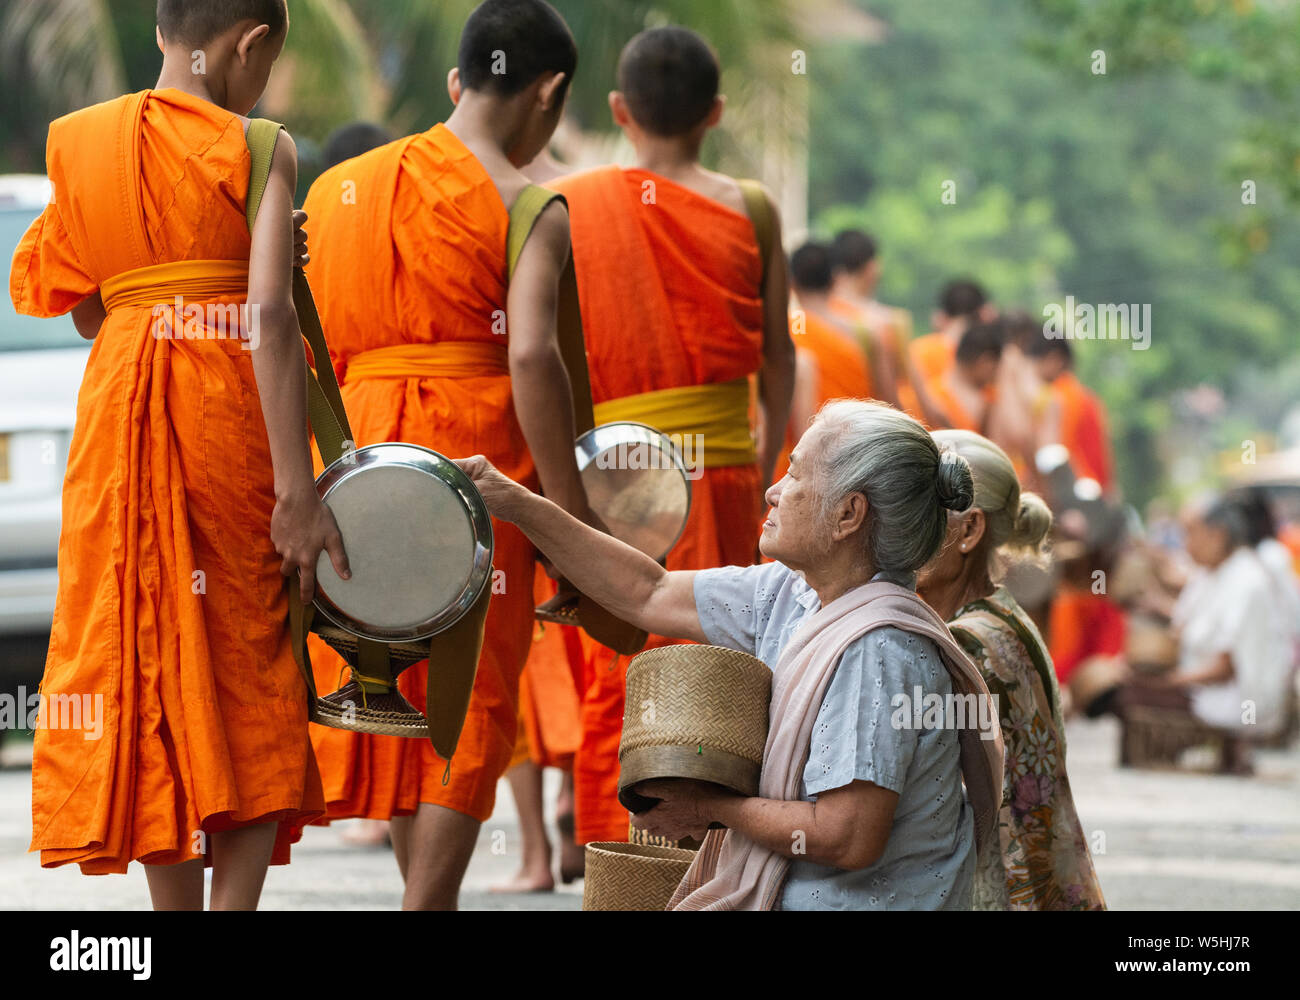 Laotian people making offerings to Buddhist monks during traditional sacred alms giving ceremony in Luang Prabang city, Laos. Stock Photo